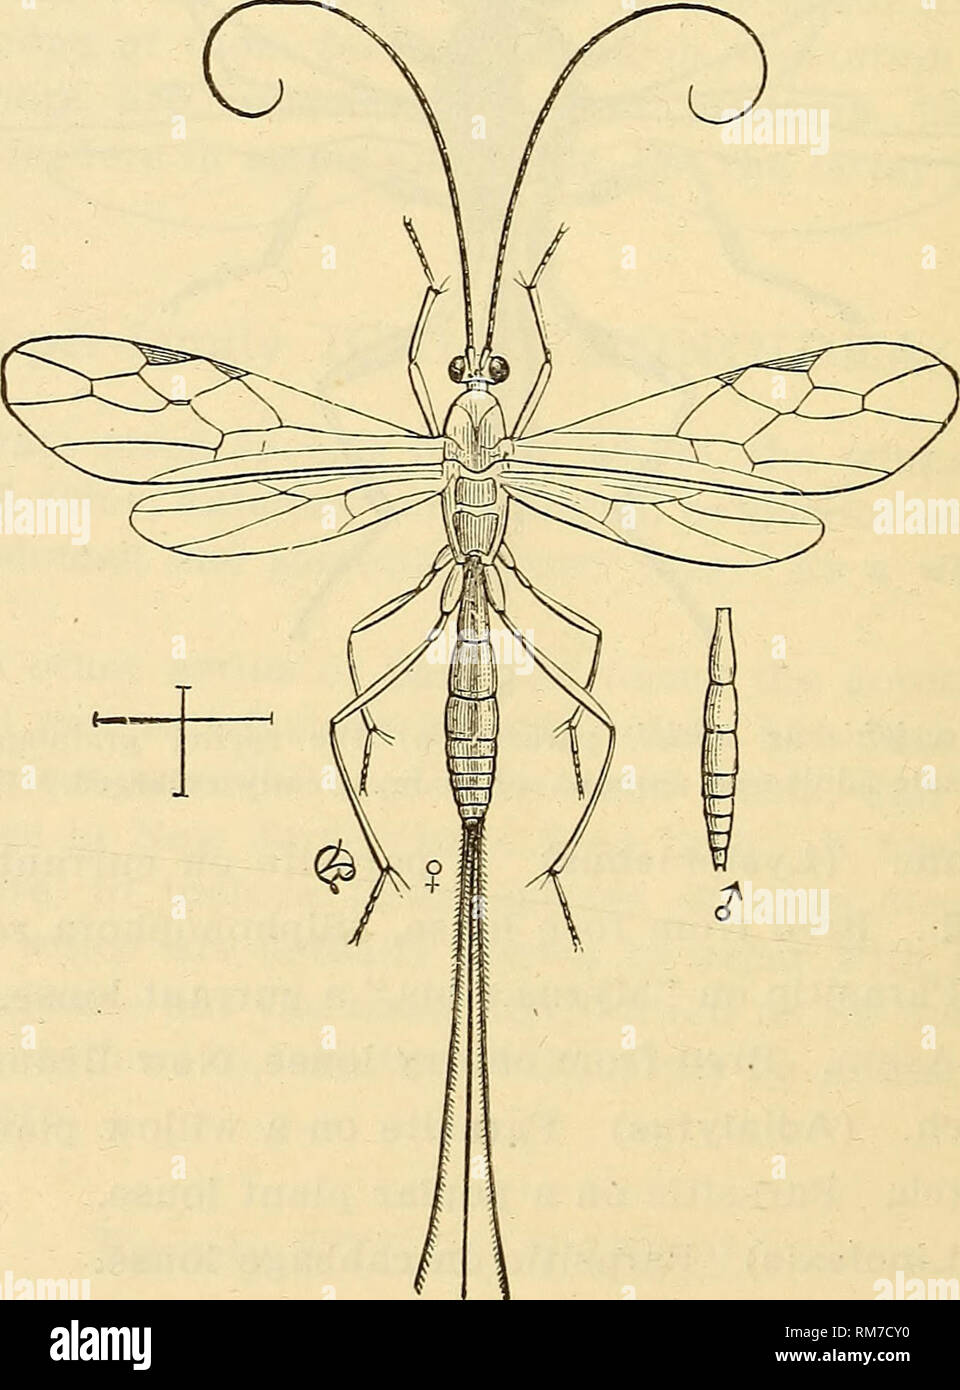 . Annual report, including a report of the insects of New Jersey, 1909. 6o6 REPORT OF NEW JERSEY STATE MUSEUM. PRAON Halid. P. avenaphis Fitch. (Aphidius) Throughout South Jersey, parasitic on the common wheat louse (Sm). P. cerasaphis Fitch. Parasite of cherry plant louse. OPIUS Wesm. O. anthomyiae Ashm. (Biosteres) Parasitic on an &quot;Anthomyid,&quot; mining leaves of Dock. O. floridanus Ashm. (Desmiostoma) New Brunswick VII (Sm); a mss. name only. O. sanguineus Ashm. Reared from &quot;Trypetids,&quot; living in galls on &quot;So- lanum carolinense.&quot; ZELE Halid. Z. uniformis Prov. New Stock Photo